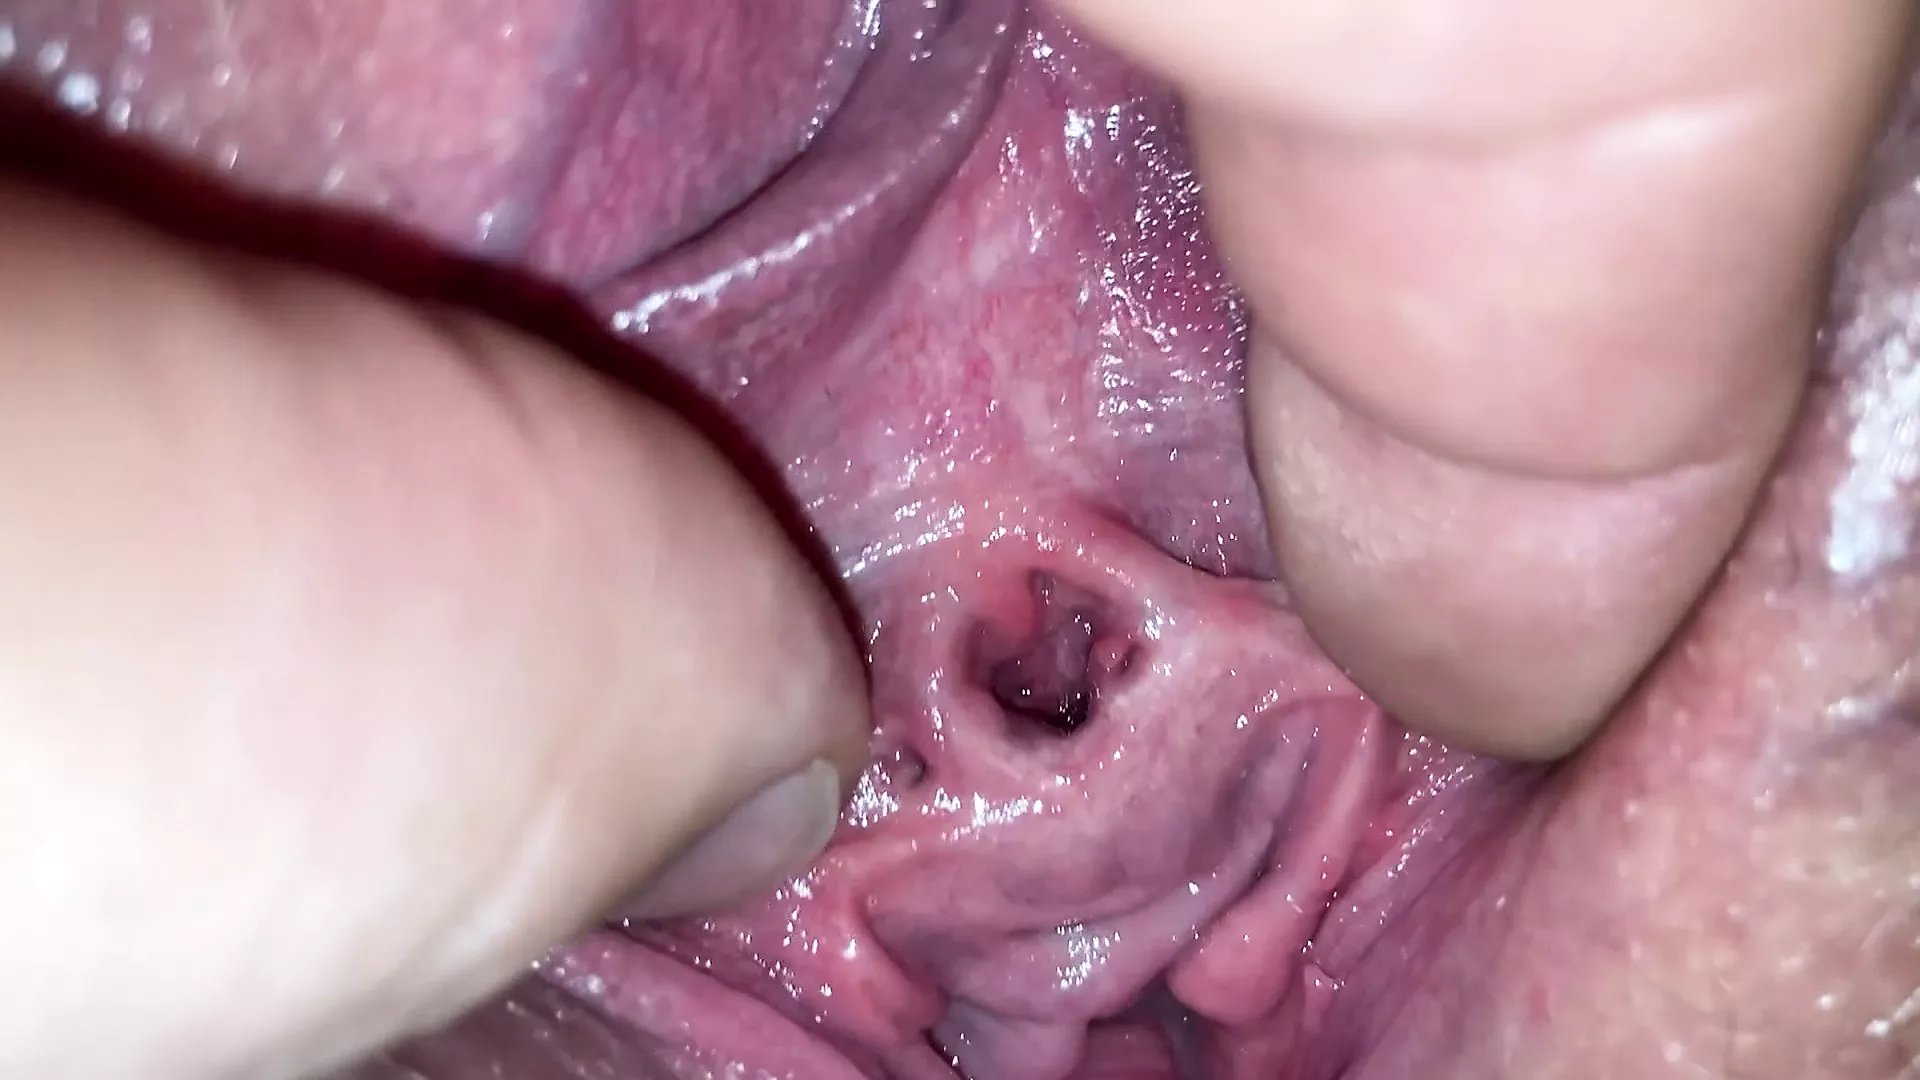 Exposed close up pov BBW open peehole fingering. BBW ass worship. Borr and Sirens Delight photo